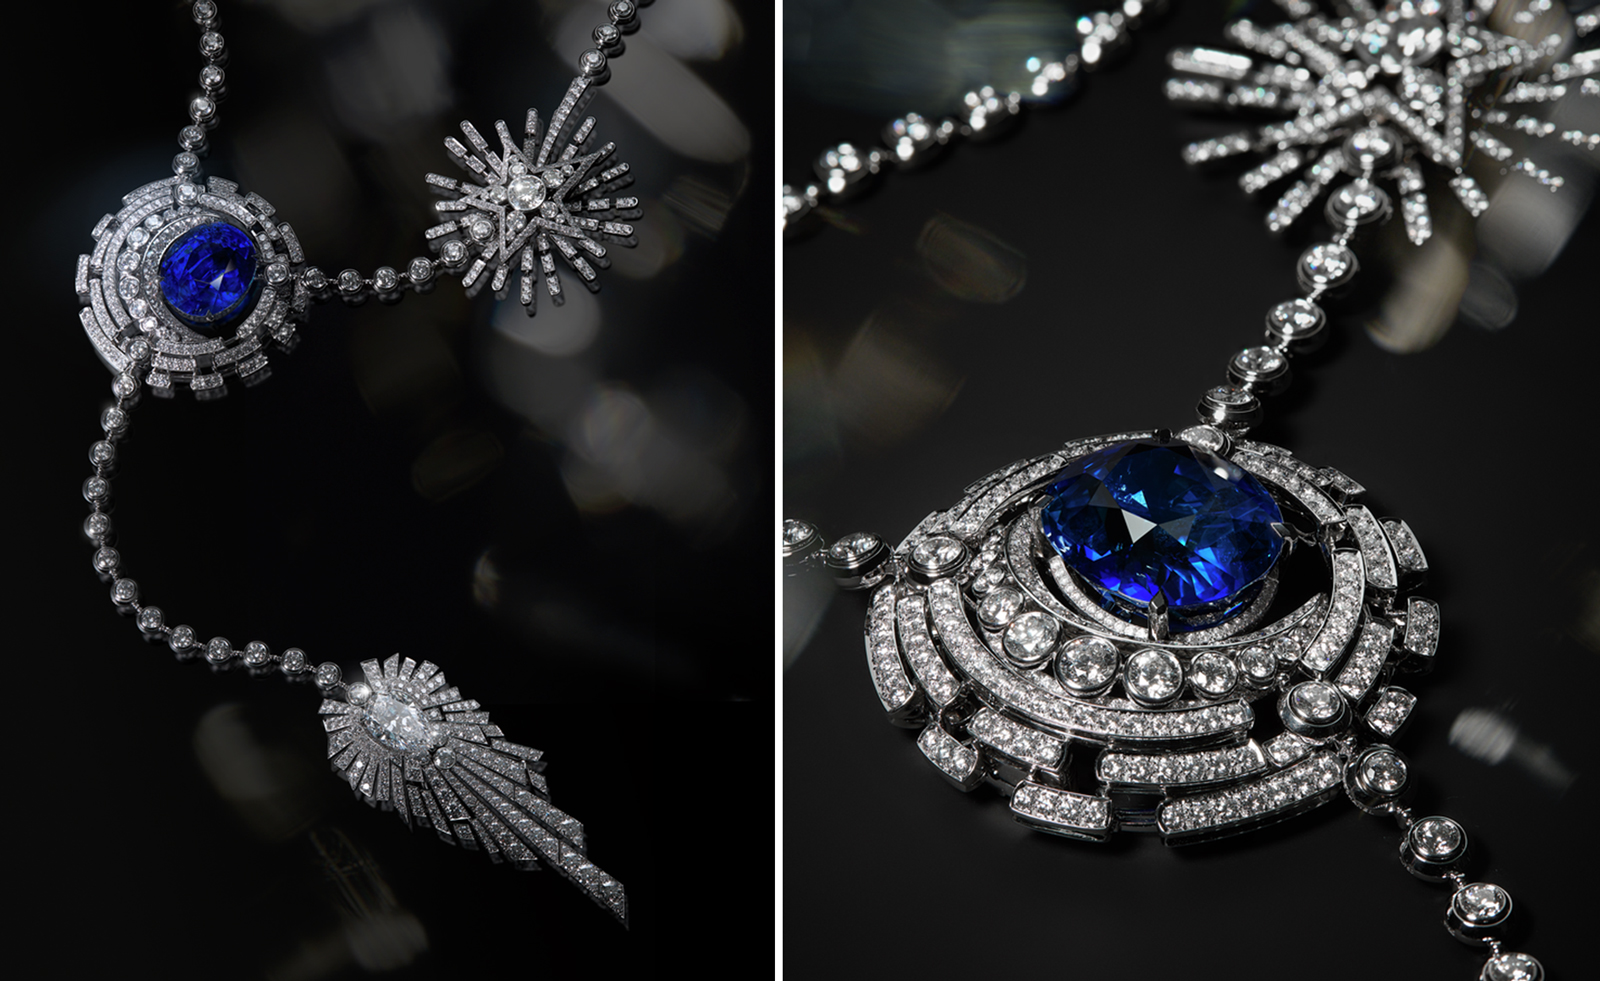 Chanel high jewellery marks 90 years with new necklace